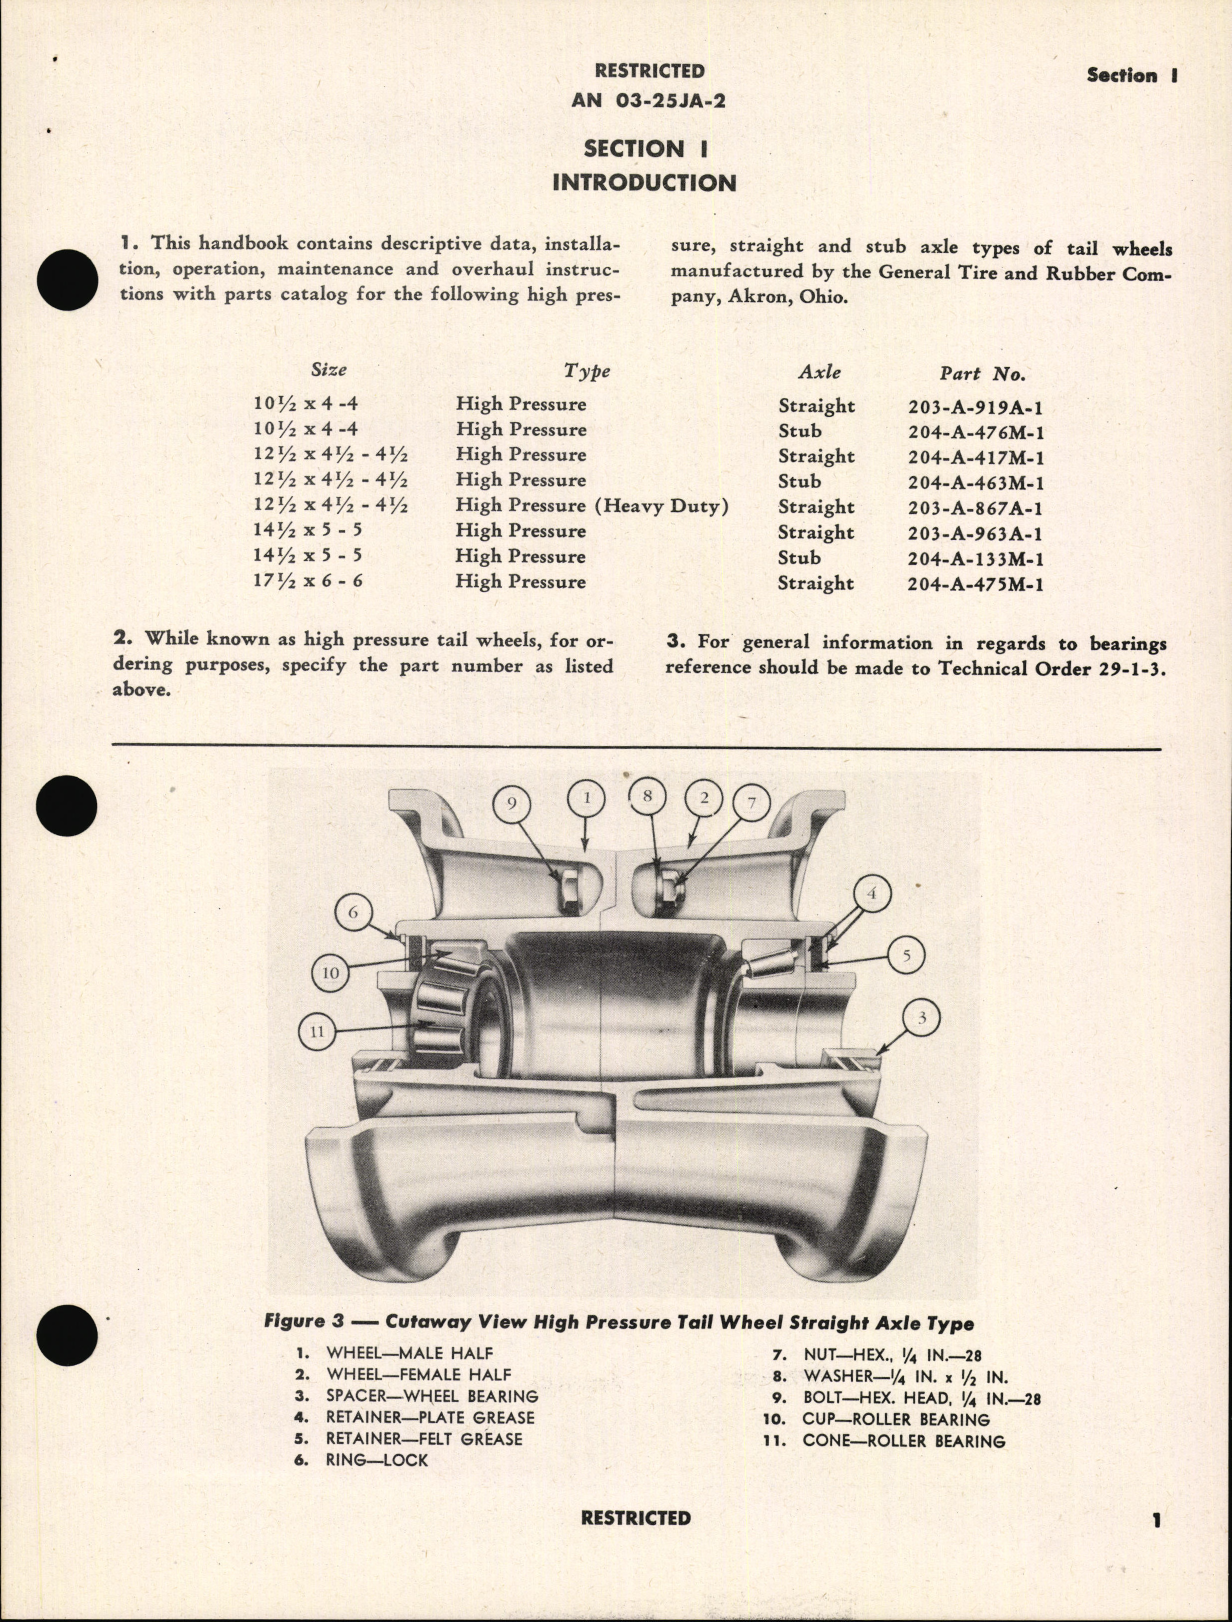 Sample page 5 from AirCorps Library document: Handbook of Instructions with Parts Catalog for High Pressure Tail Wheels